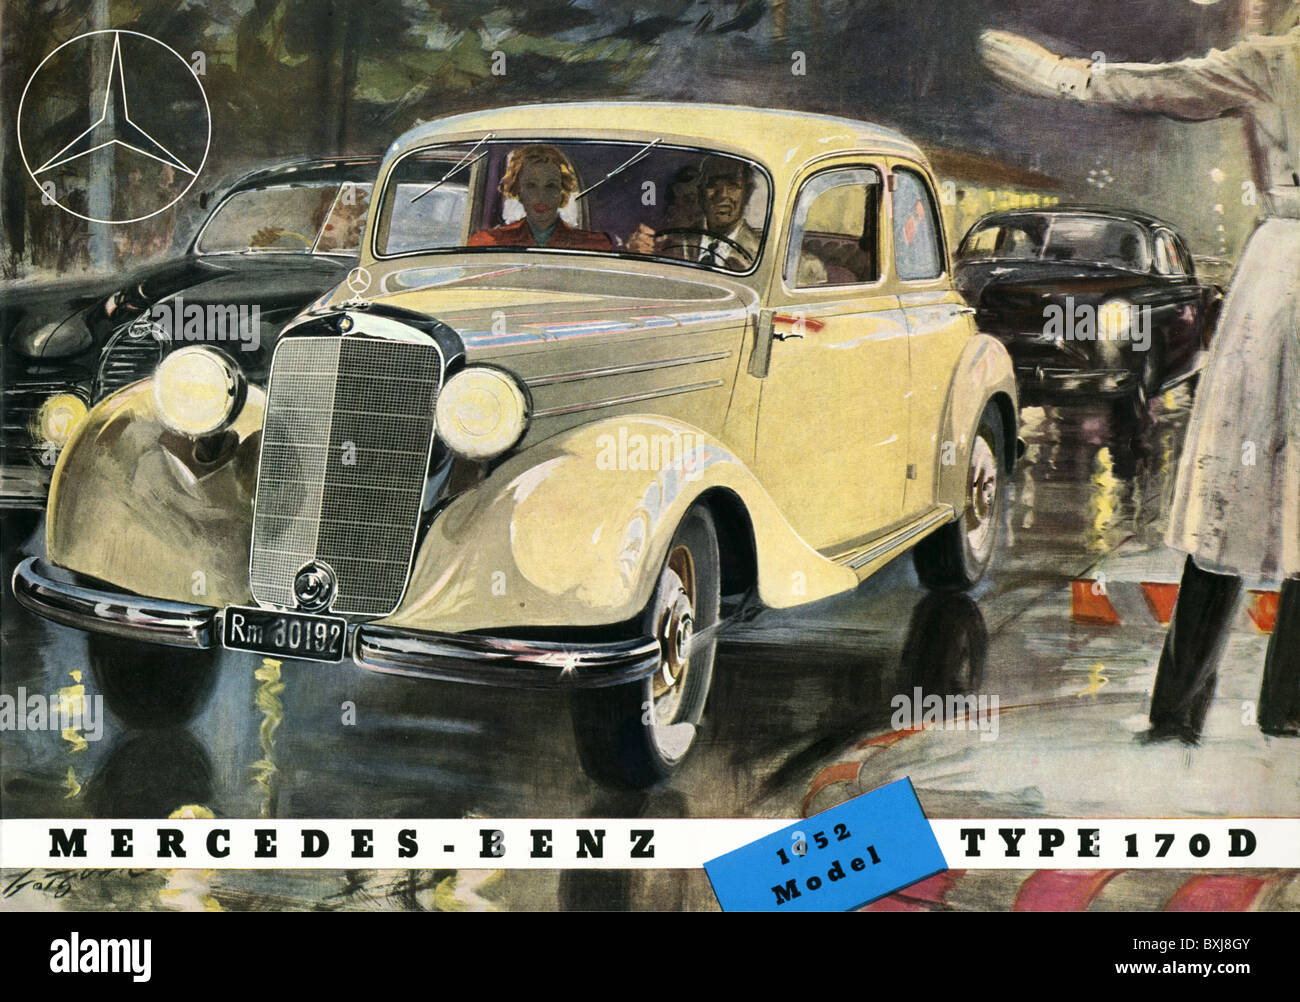 transport / transportation, car, vehicle variants, Mercedes Benz, Typ 170 D, build from 1949 until 1953, Germany, 1952, 1950s, 50s, 20th century, historic, historical, Daimler Benz, Daimler Chrysler, diesel, diesel engine, diesel engines, bonnet, engine bonnet, hood, bonnets, engine bonnets, hoods, prospectus, rain, driver, drivers, city traffic, constable, constables, car, cars, automobile, automobiles, economic miracle, economic miracles, advertising, people, Additional-Rights-Clearences-Not Available Stock Photo